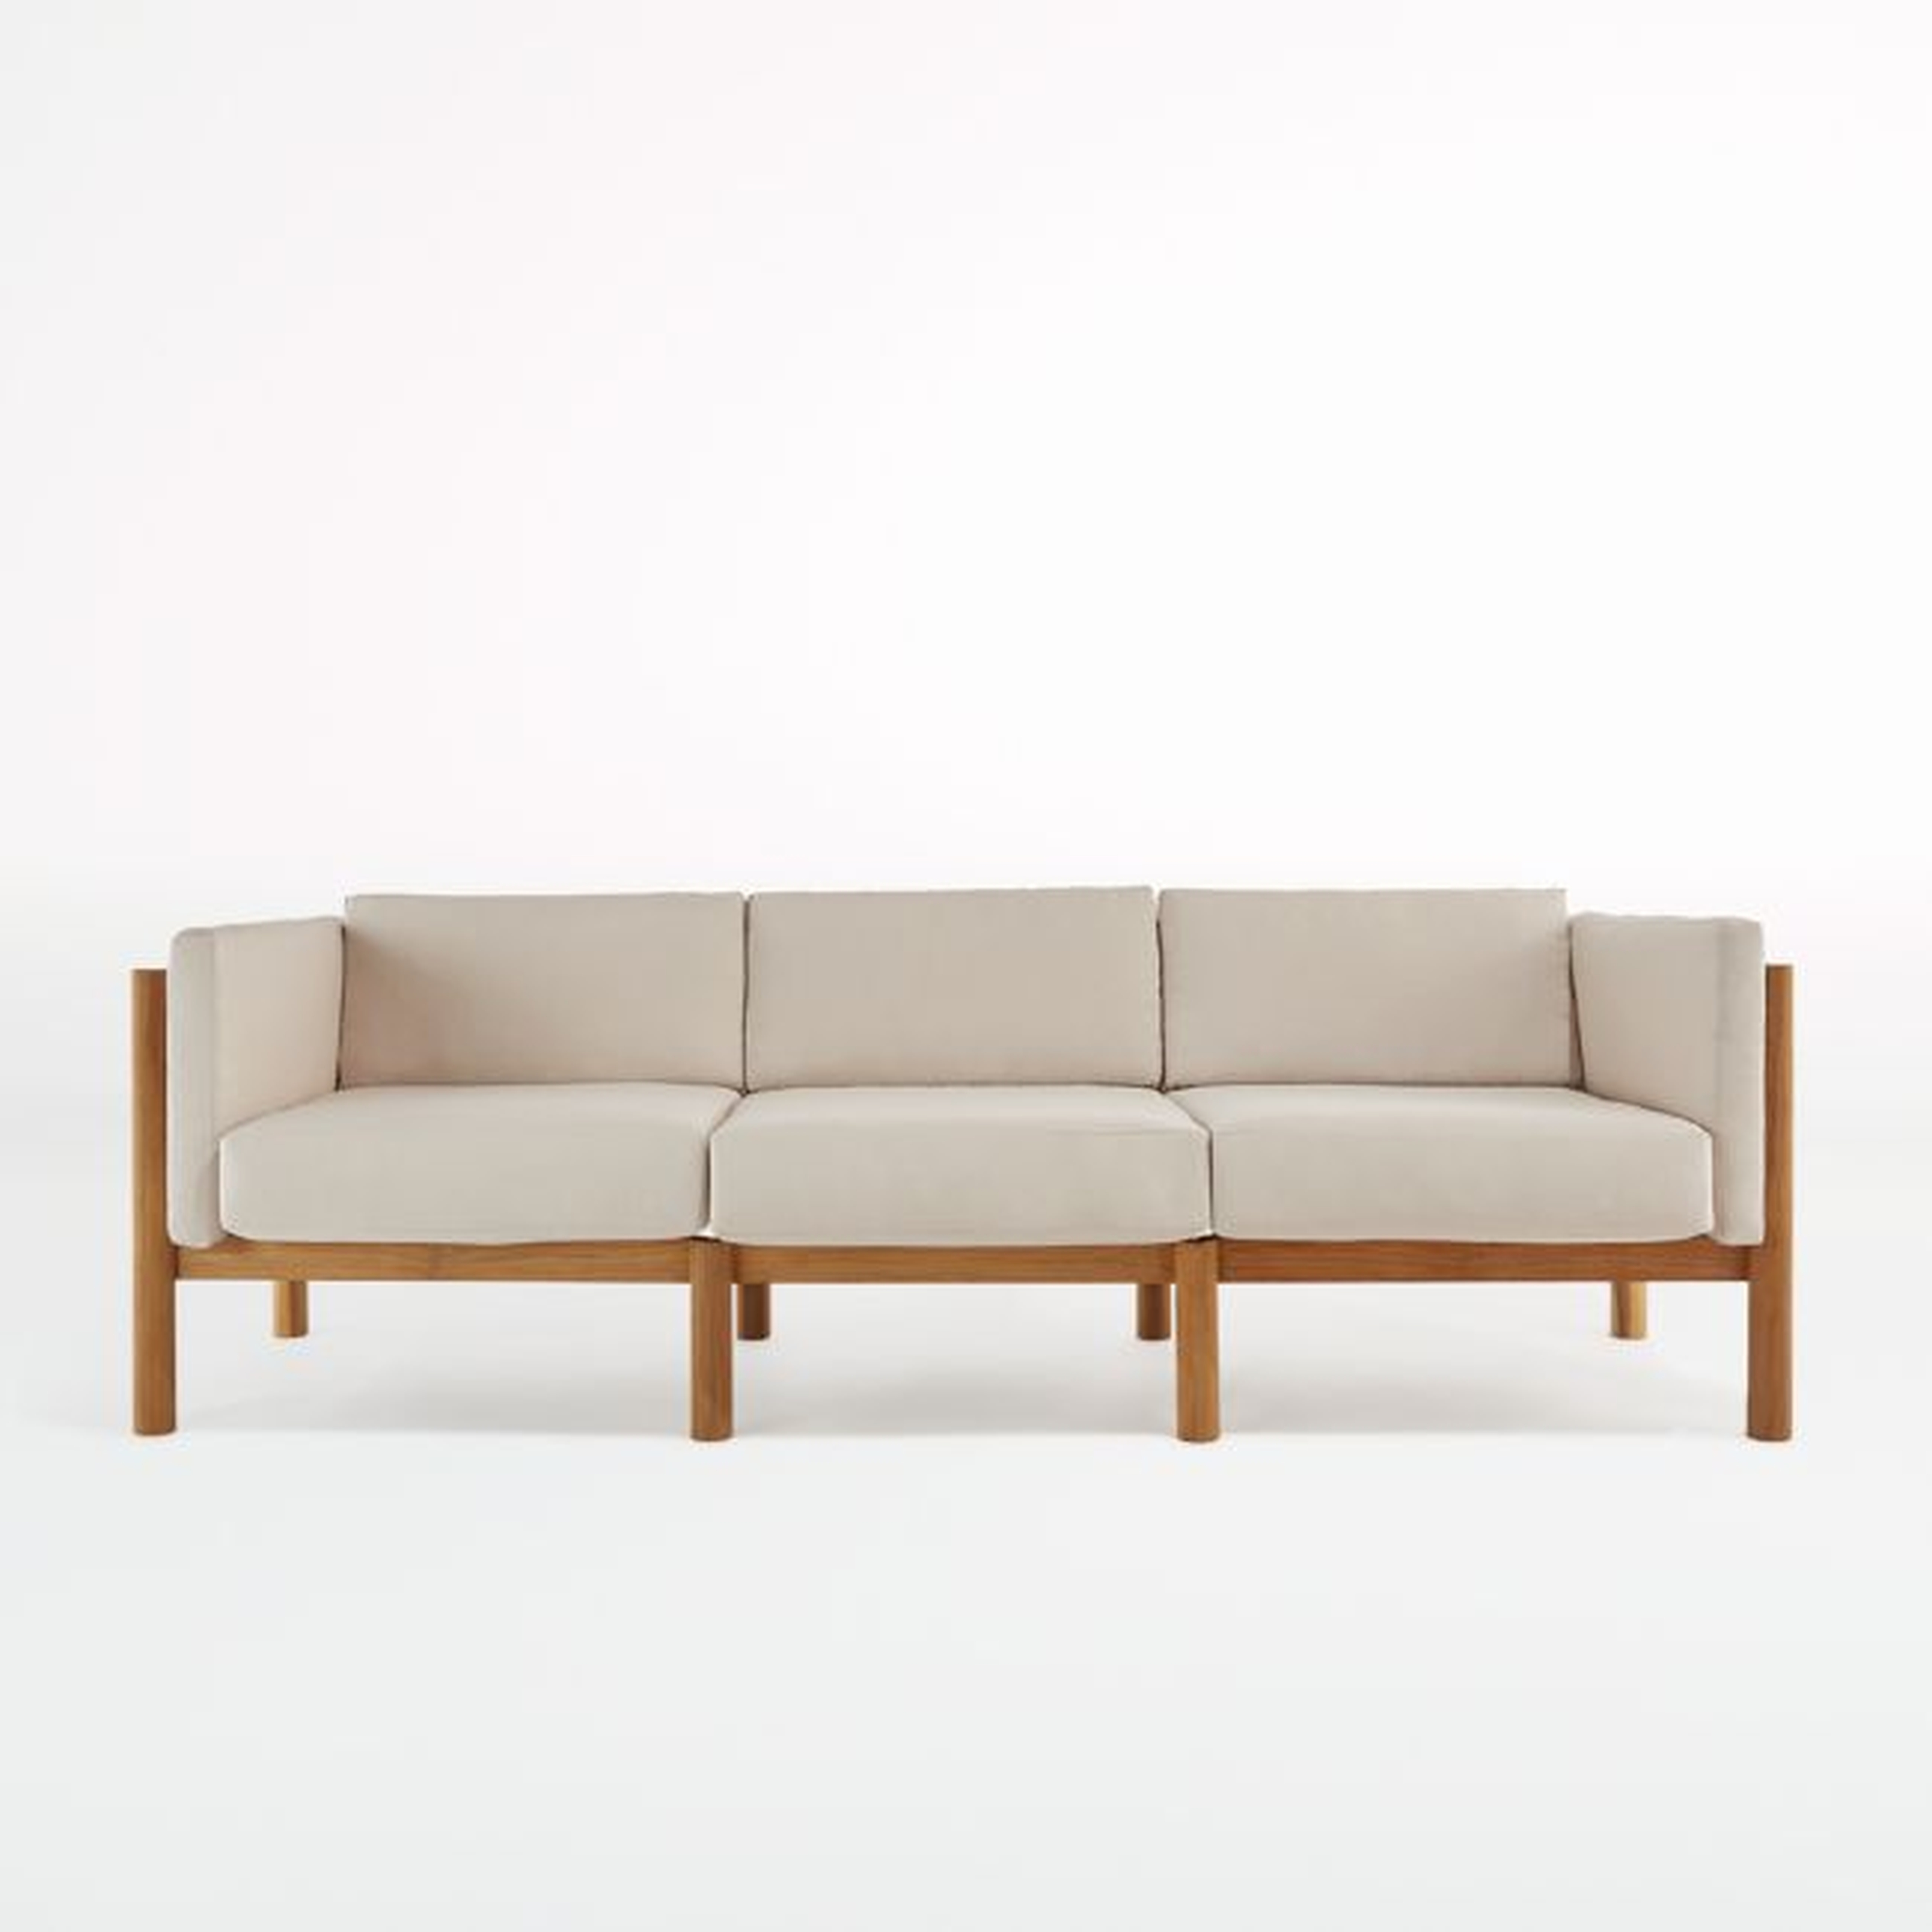 Neighbor ™ Haven Canvas Outdoor Sofa - Crate and Barrel